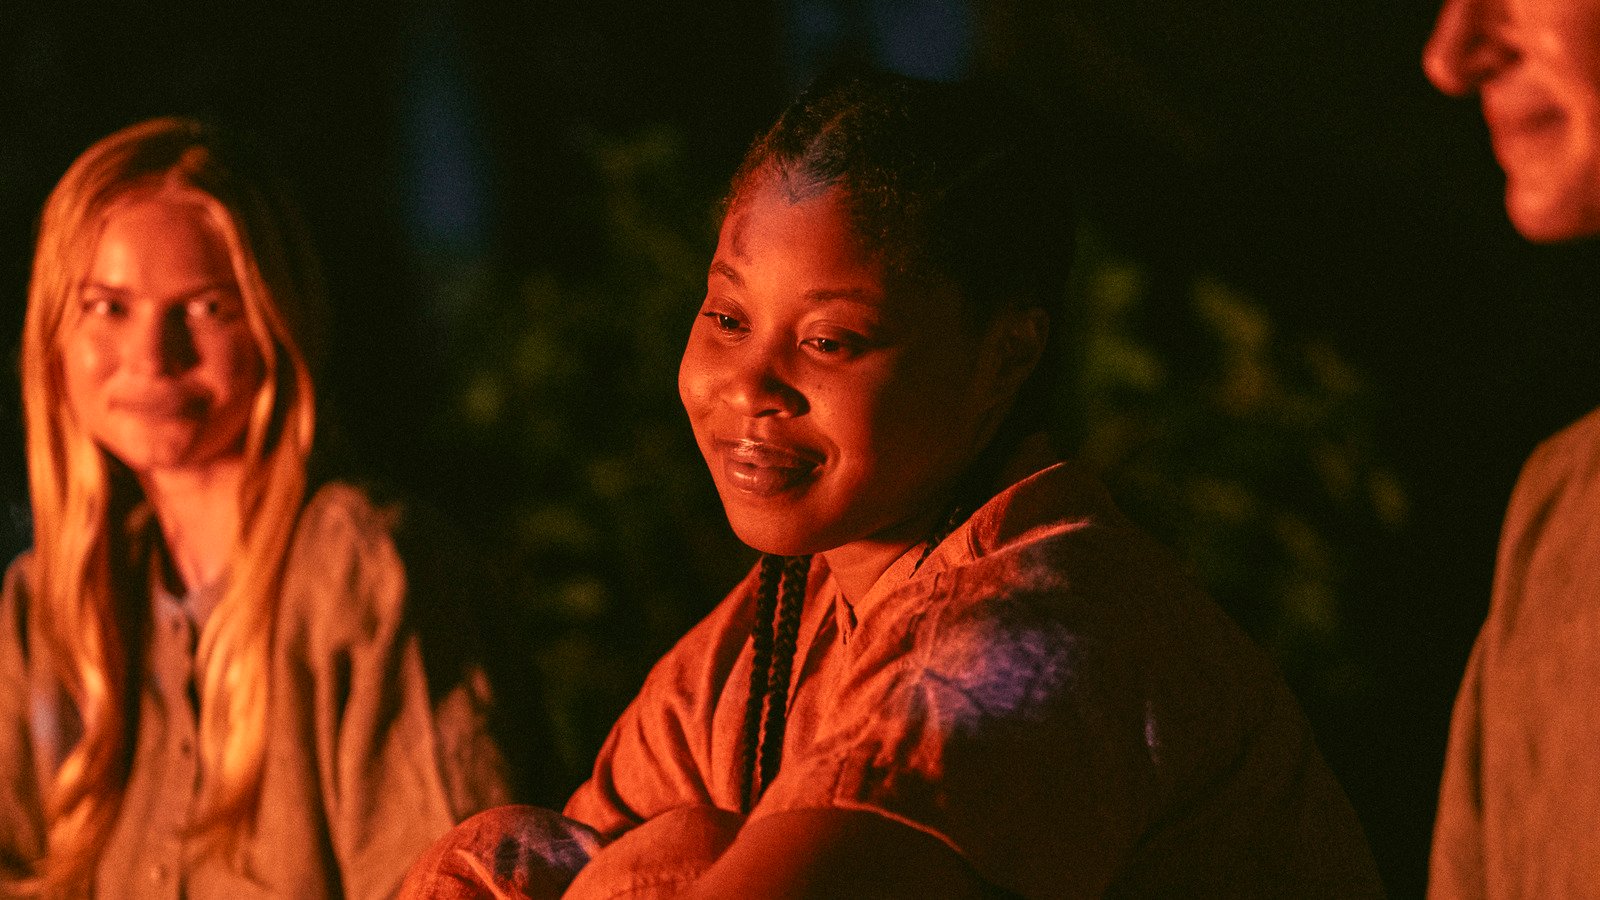 Image of Dominique Fishback as Dre in Amazon's 'Swarm.' We see Dre from the shoulders up as she's seated around a fire with two other women who are slightly out of focus. She is lit by firelight, and has a soft smile on her face as she looks at the fire. She's hugging her knees. She has long, dark braids.